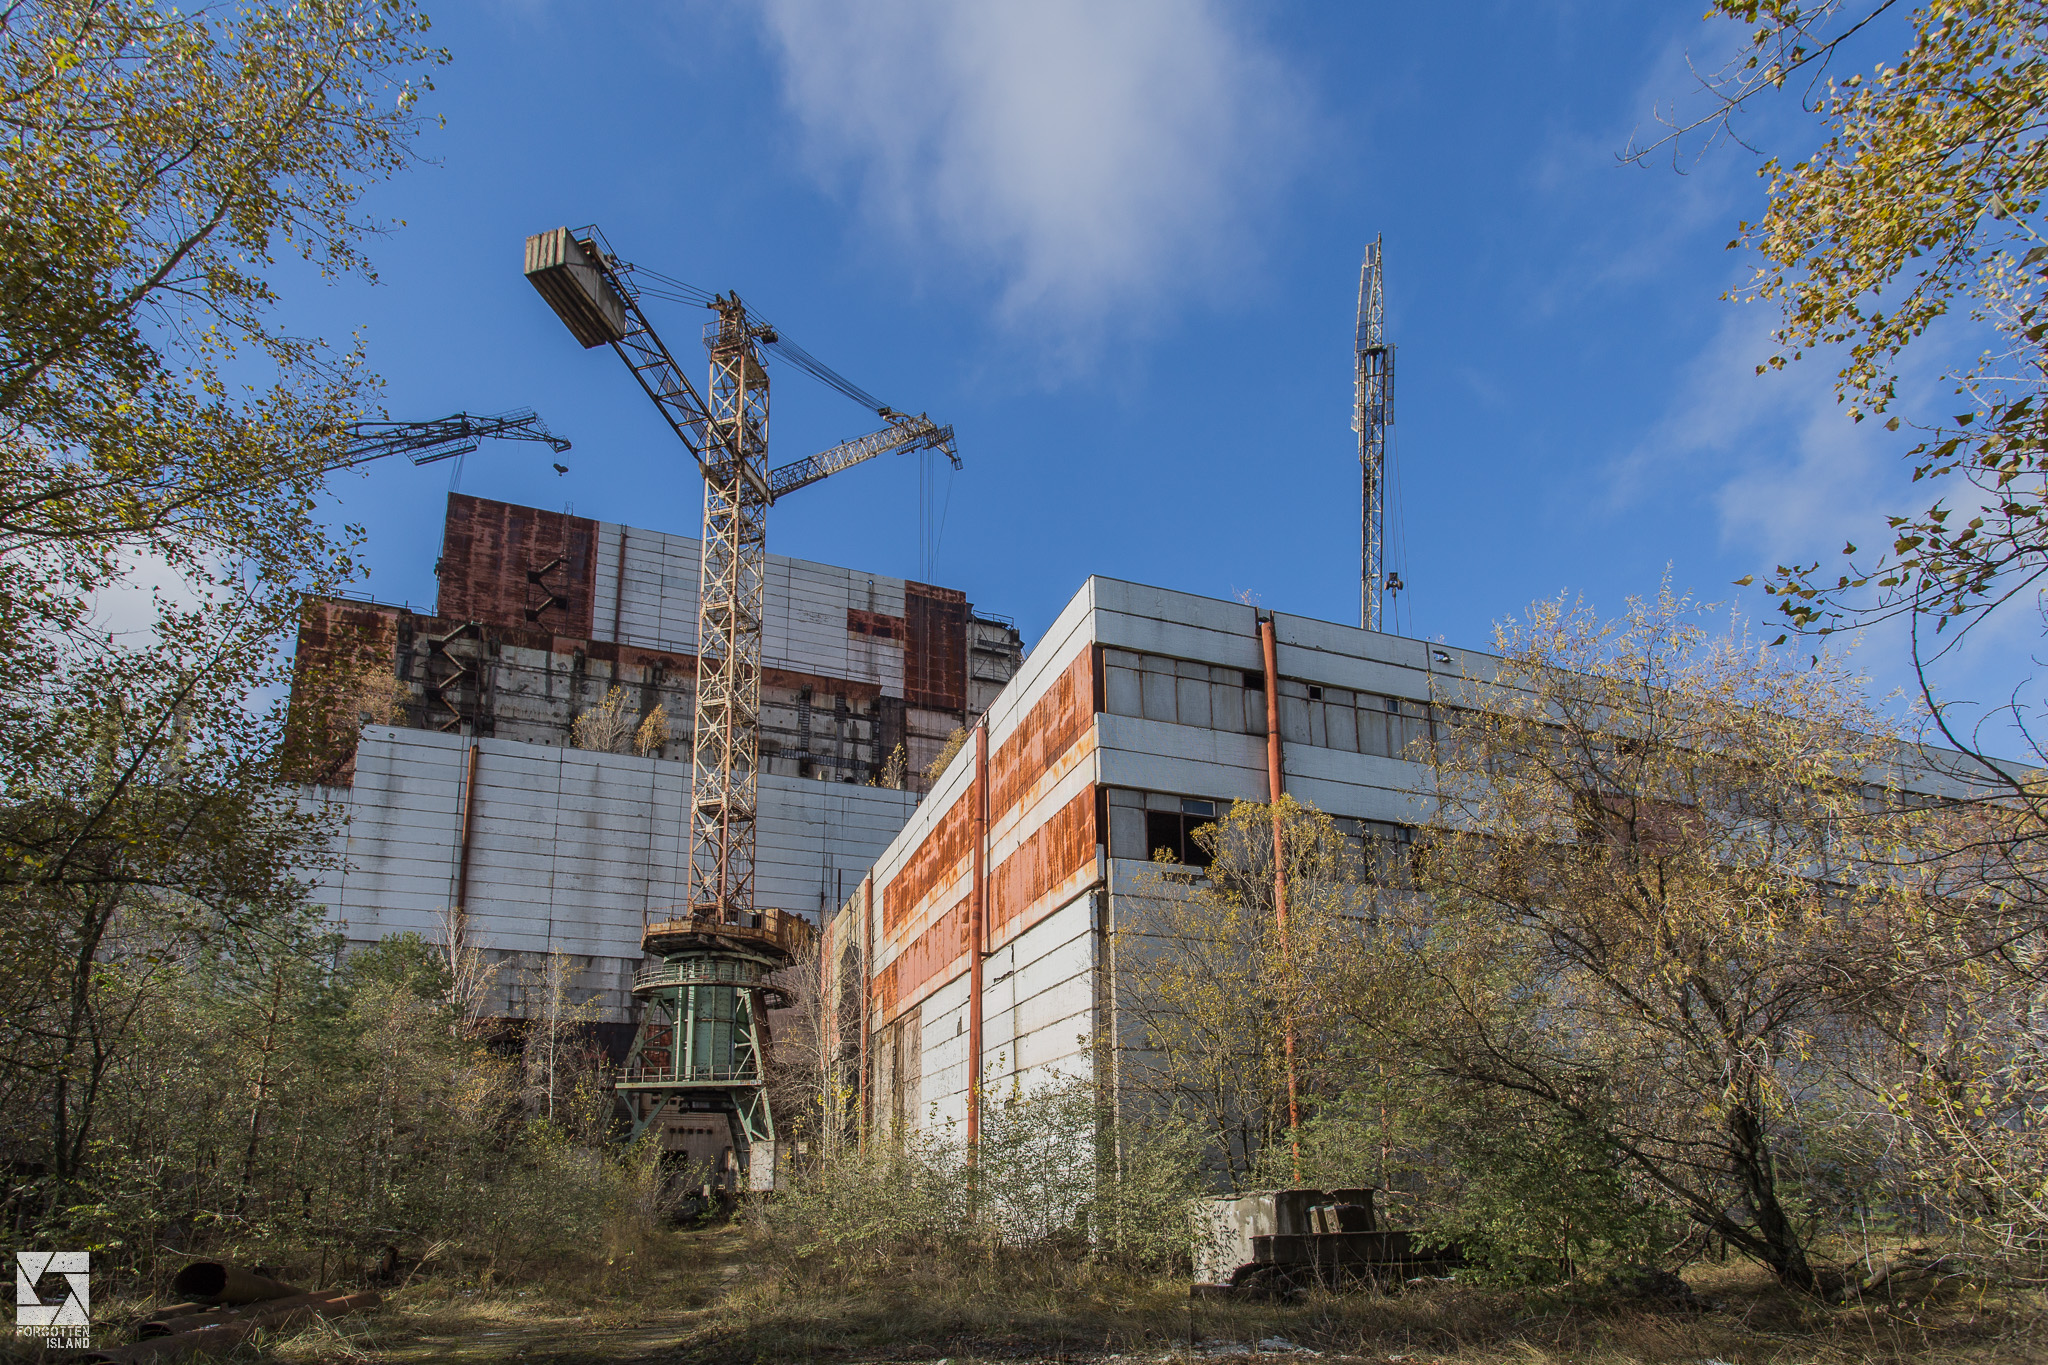 Chernobyl Reactor Block 5 and 6